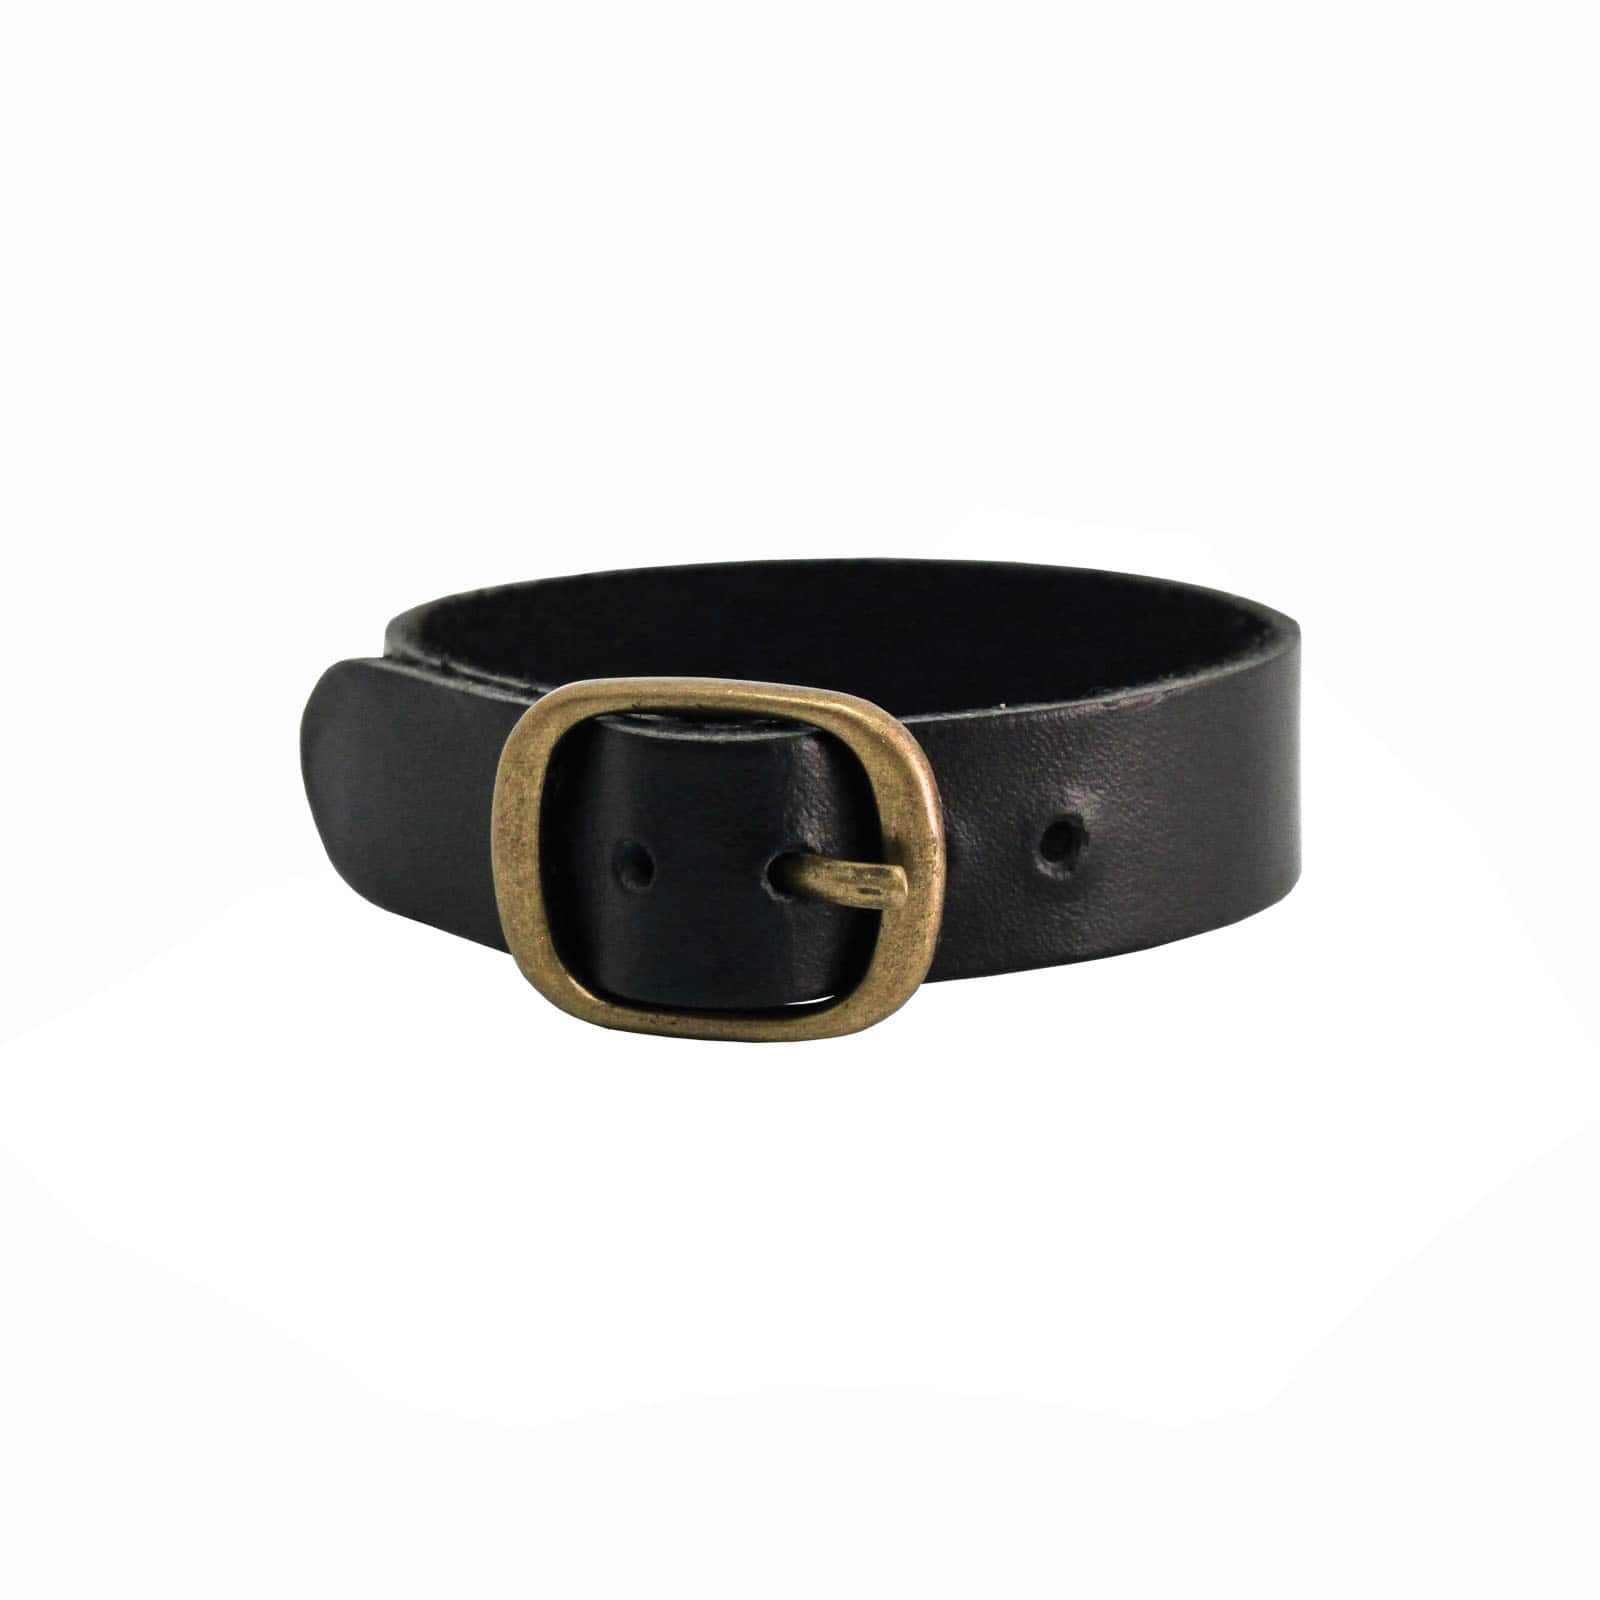 Belt Clasps And Buckles Sale Online, SAVE 55% 